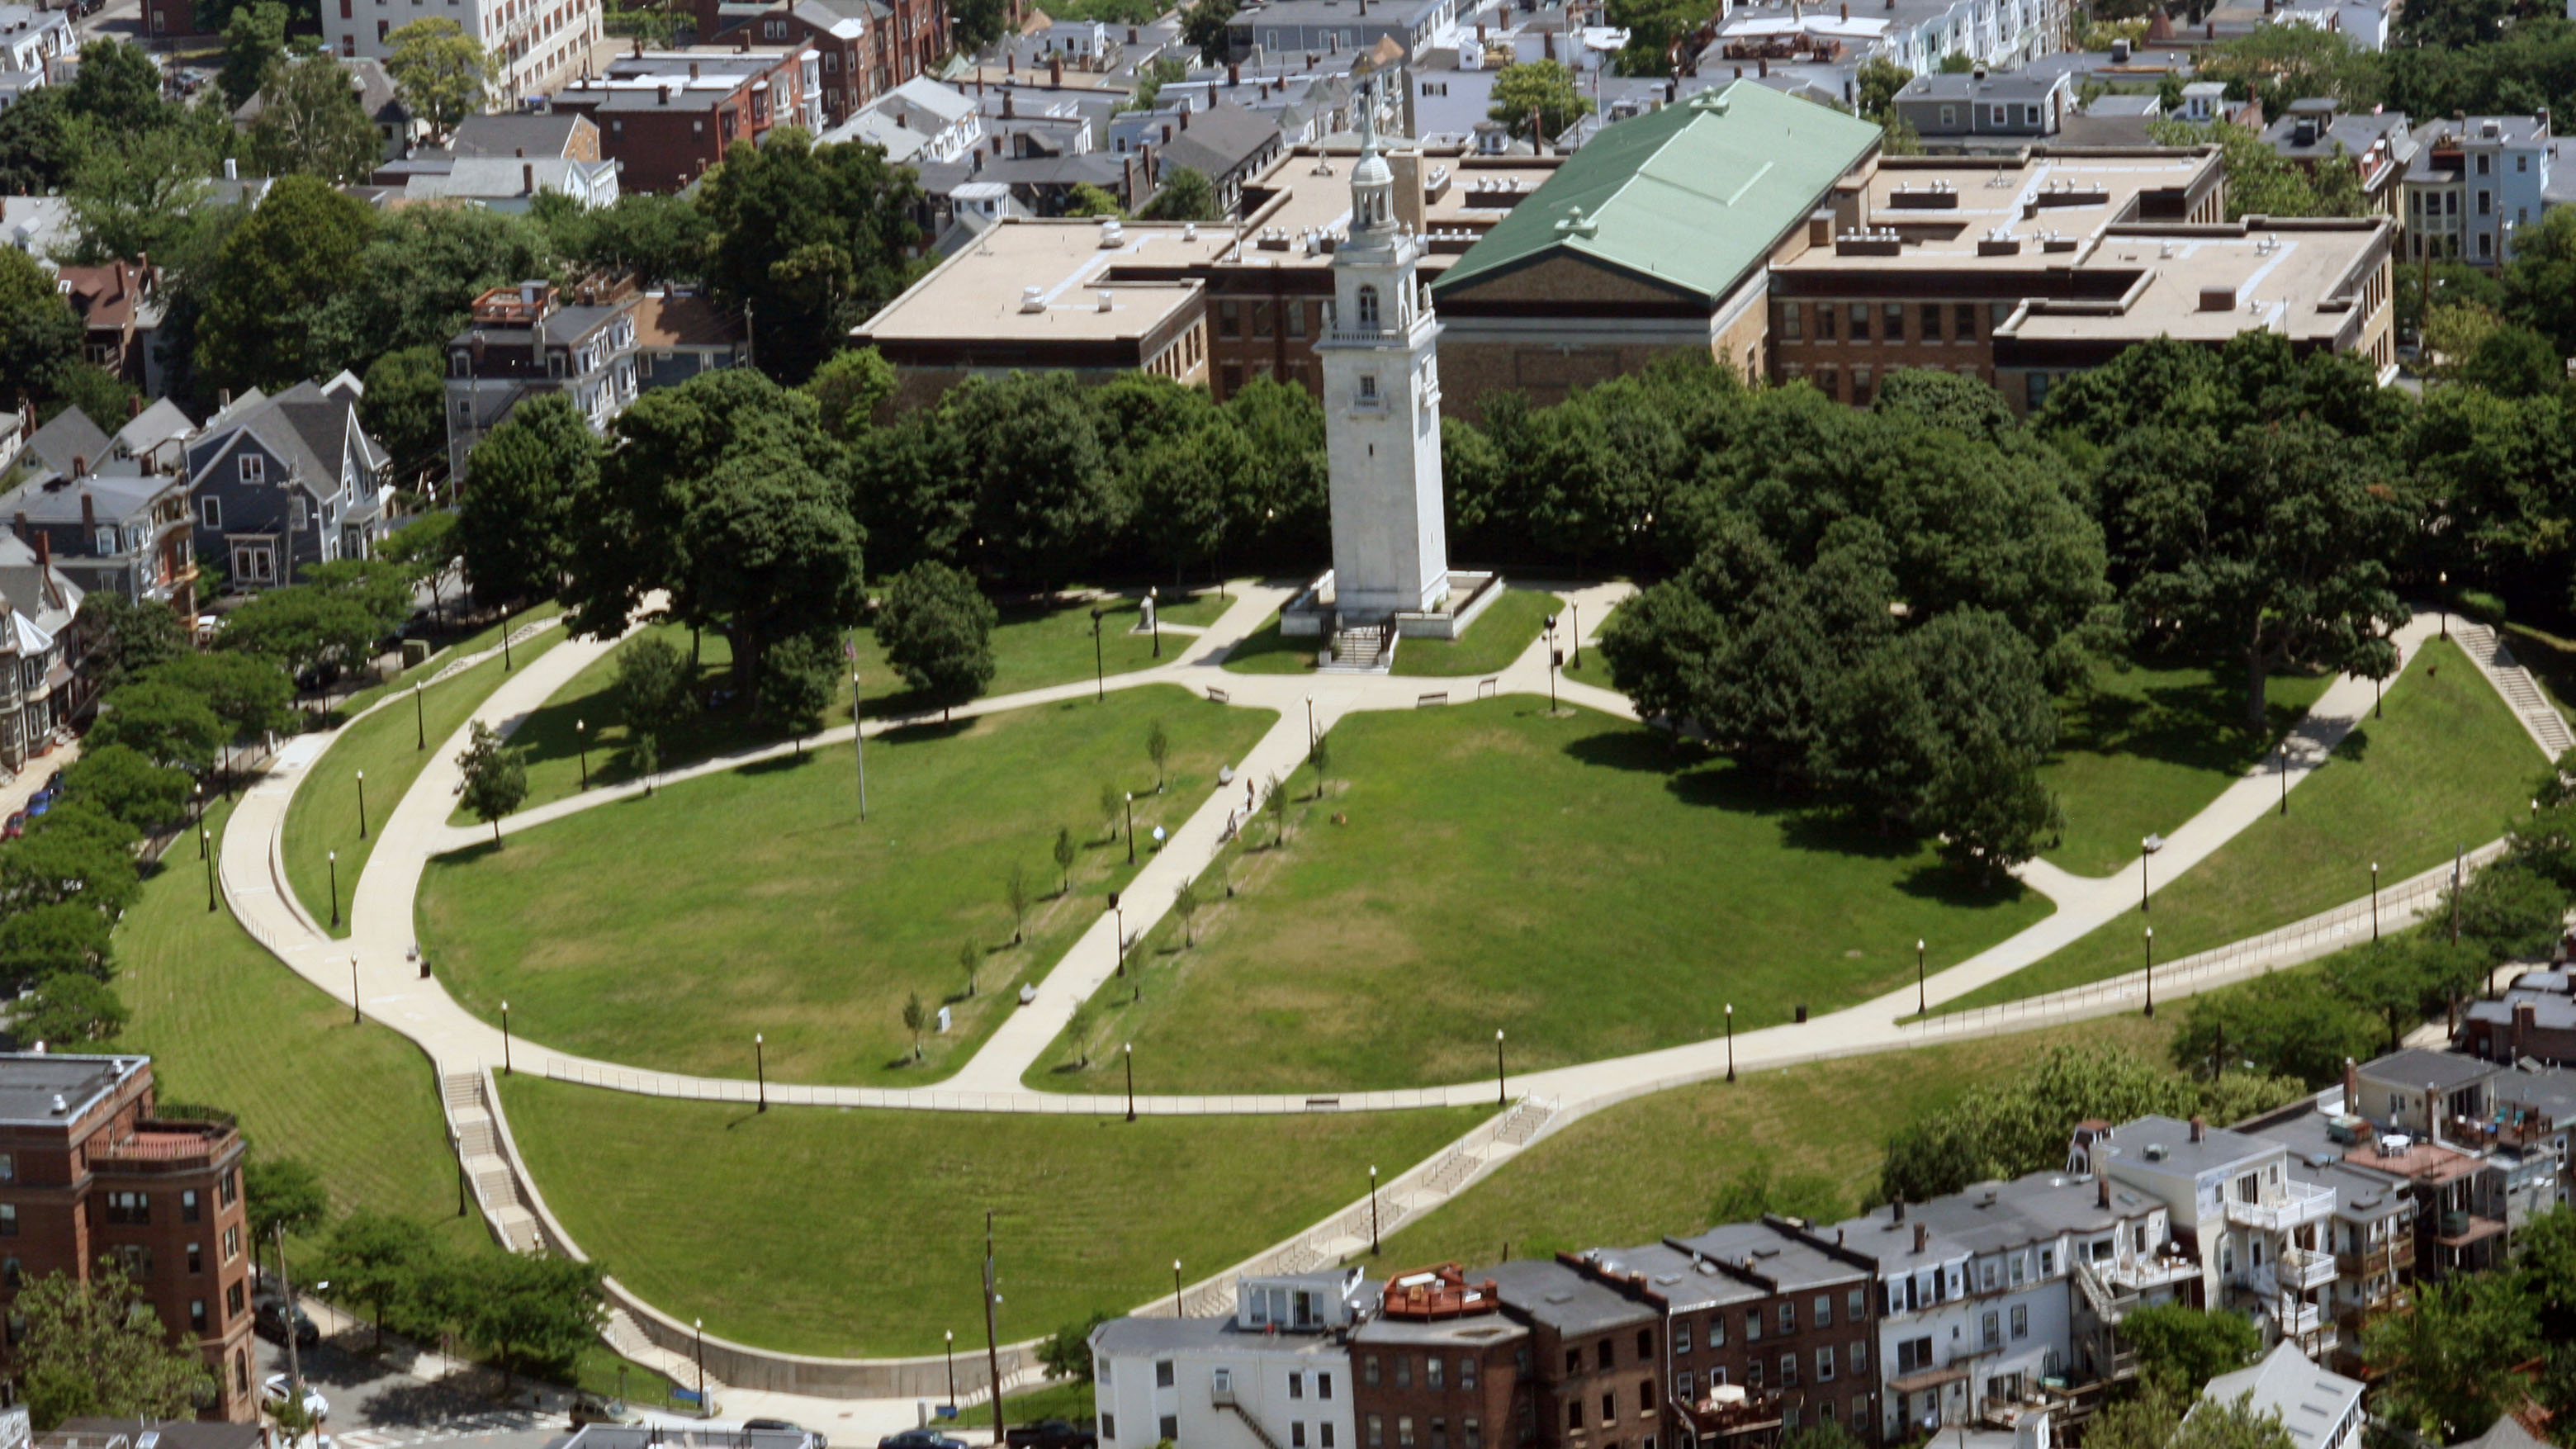 Aerial photograph showing an elliptical park with grassy areas in the front and trees in the back. In between the trees stands a marble monument with square base, small cupola on top, with a spire.